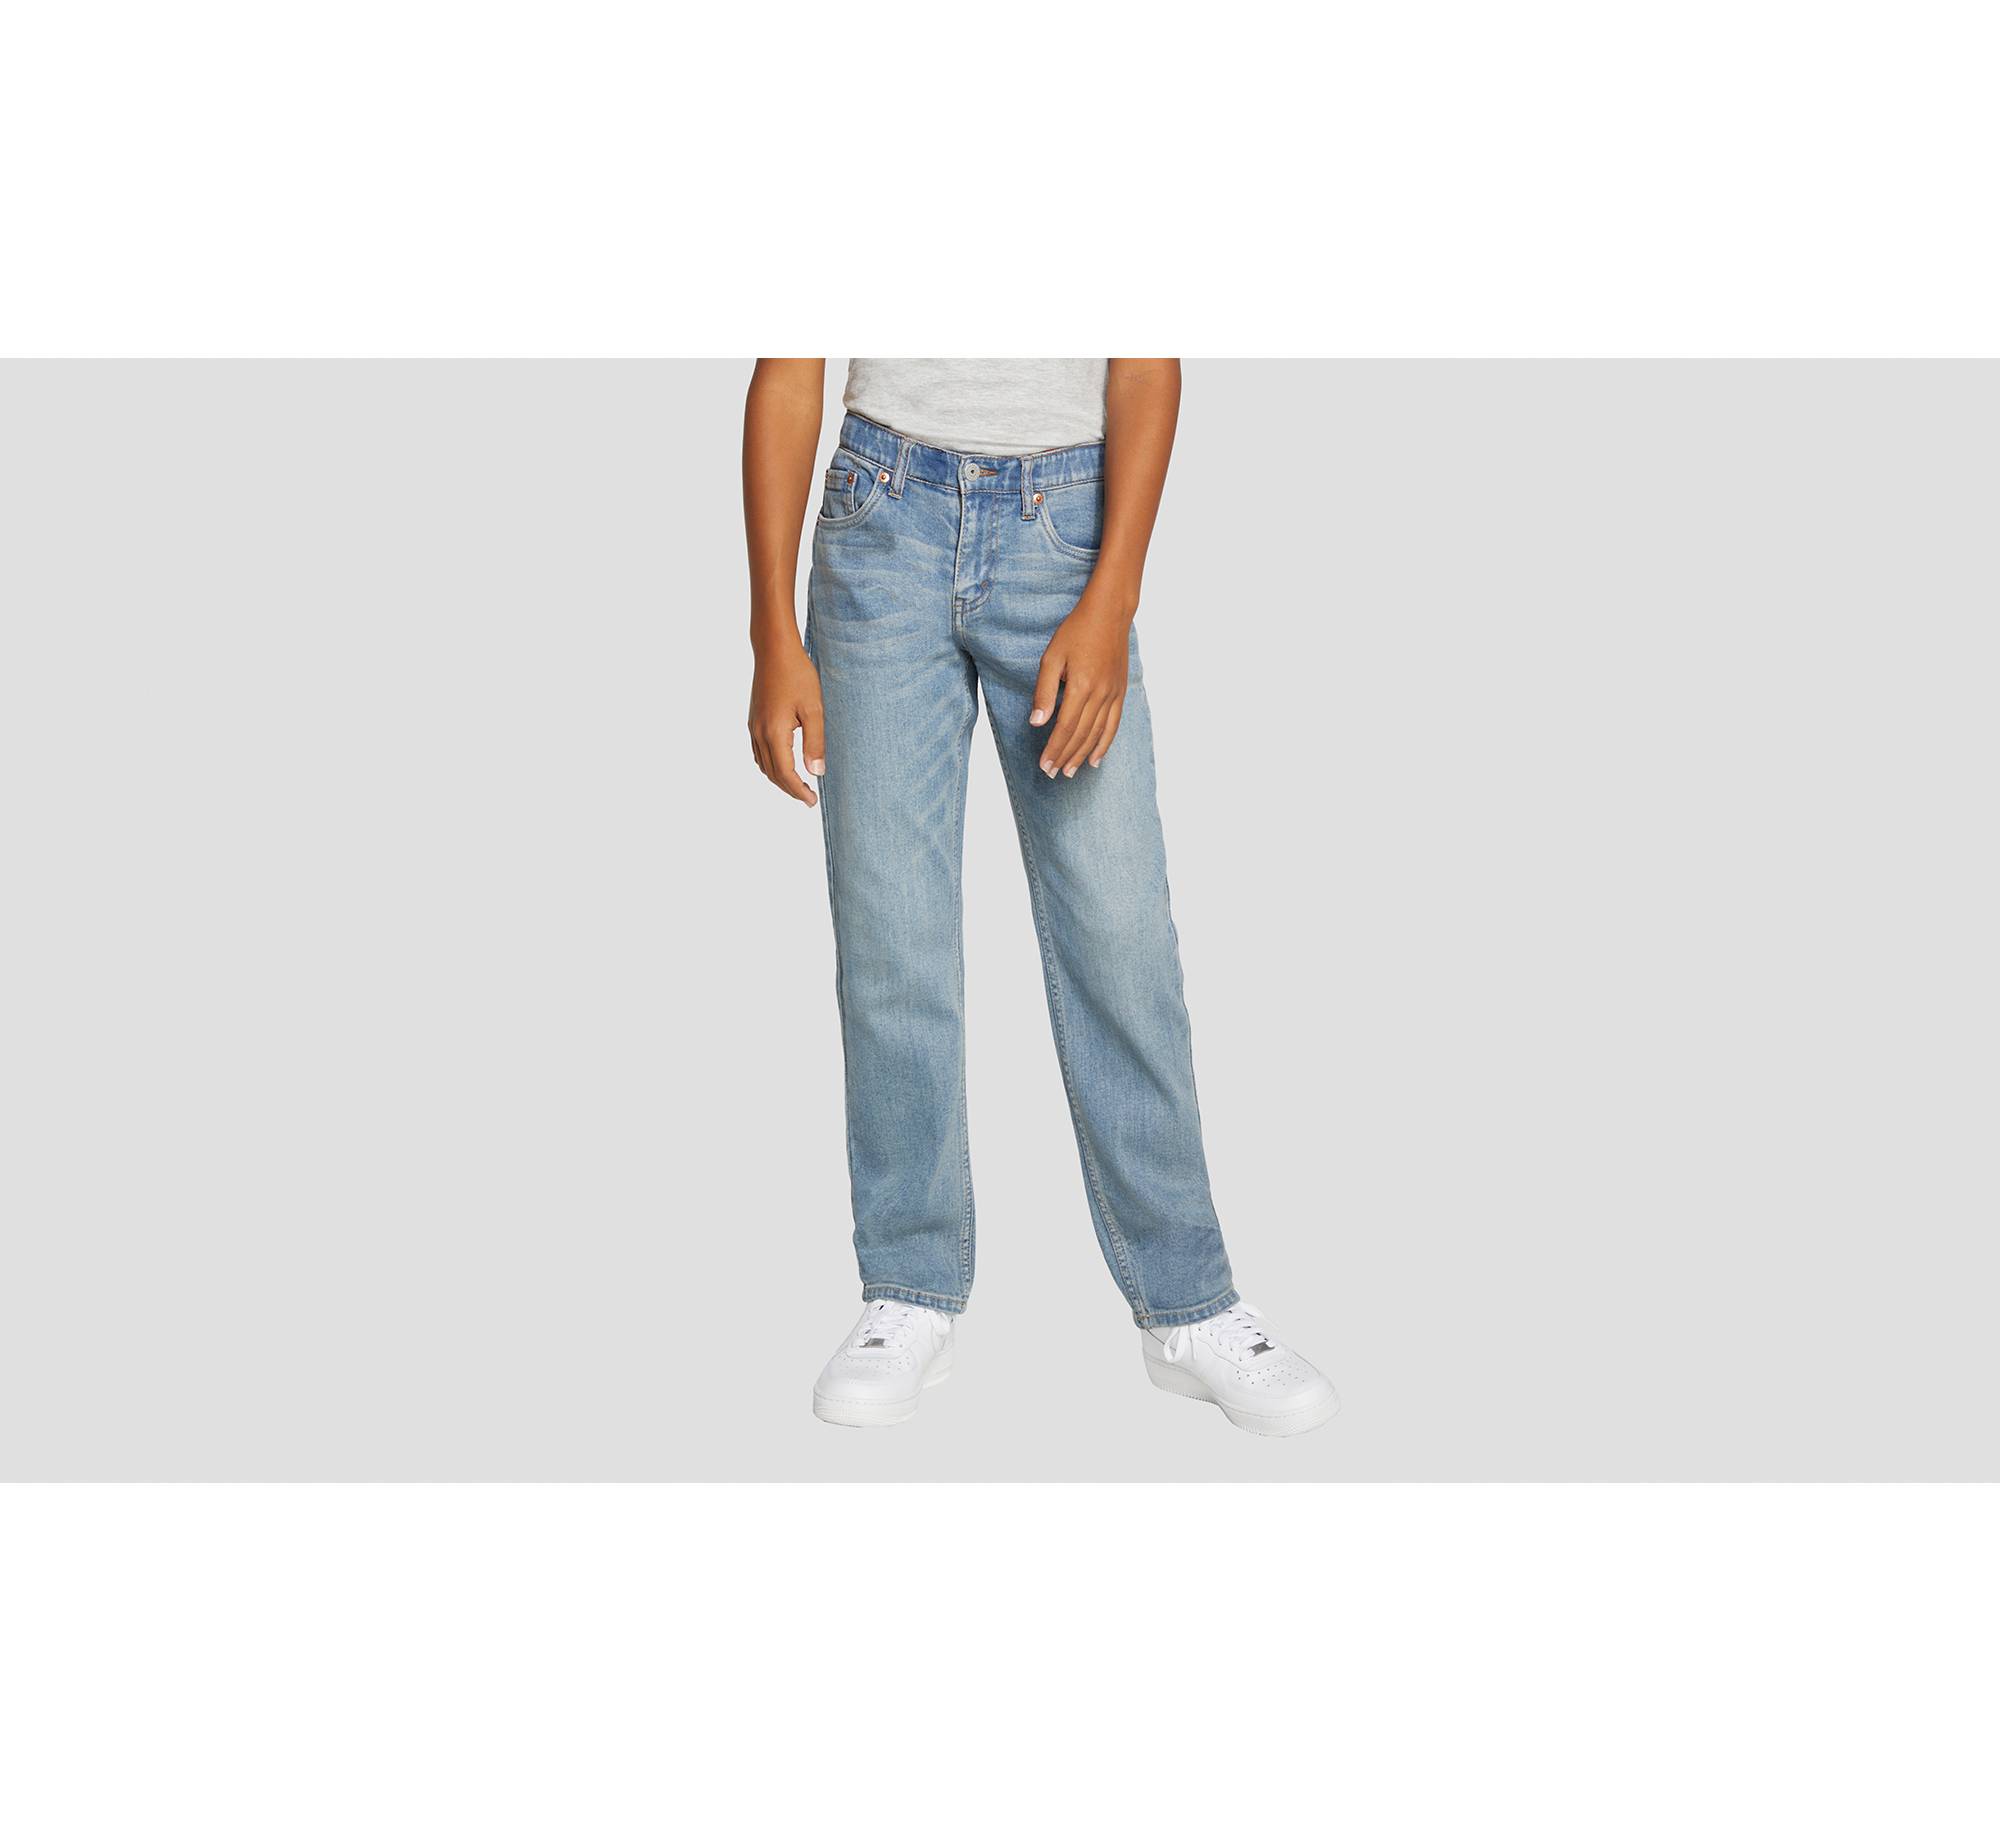 514™ Straight Fit Big Boys Jeans 8-20 1